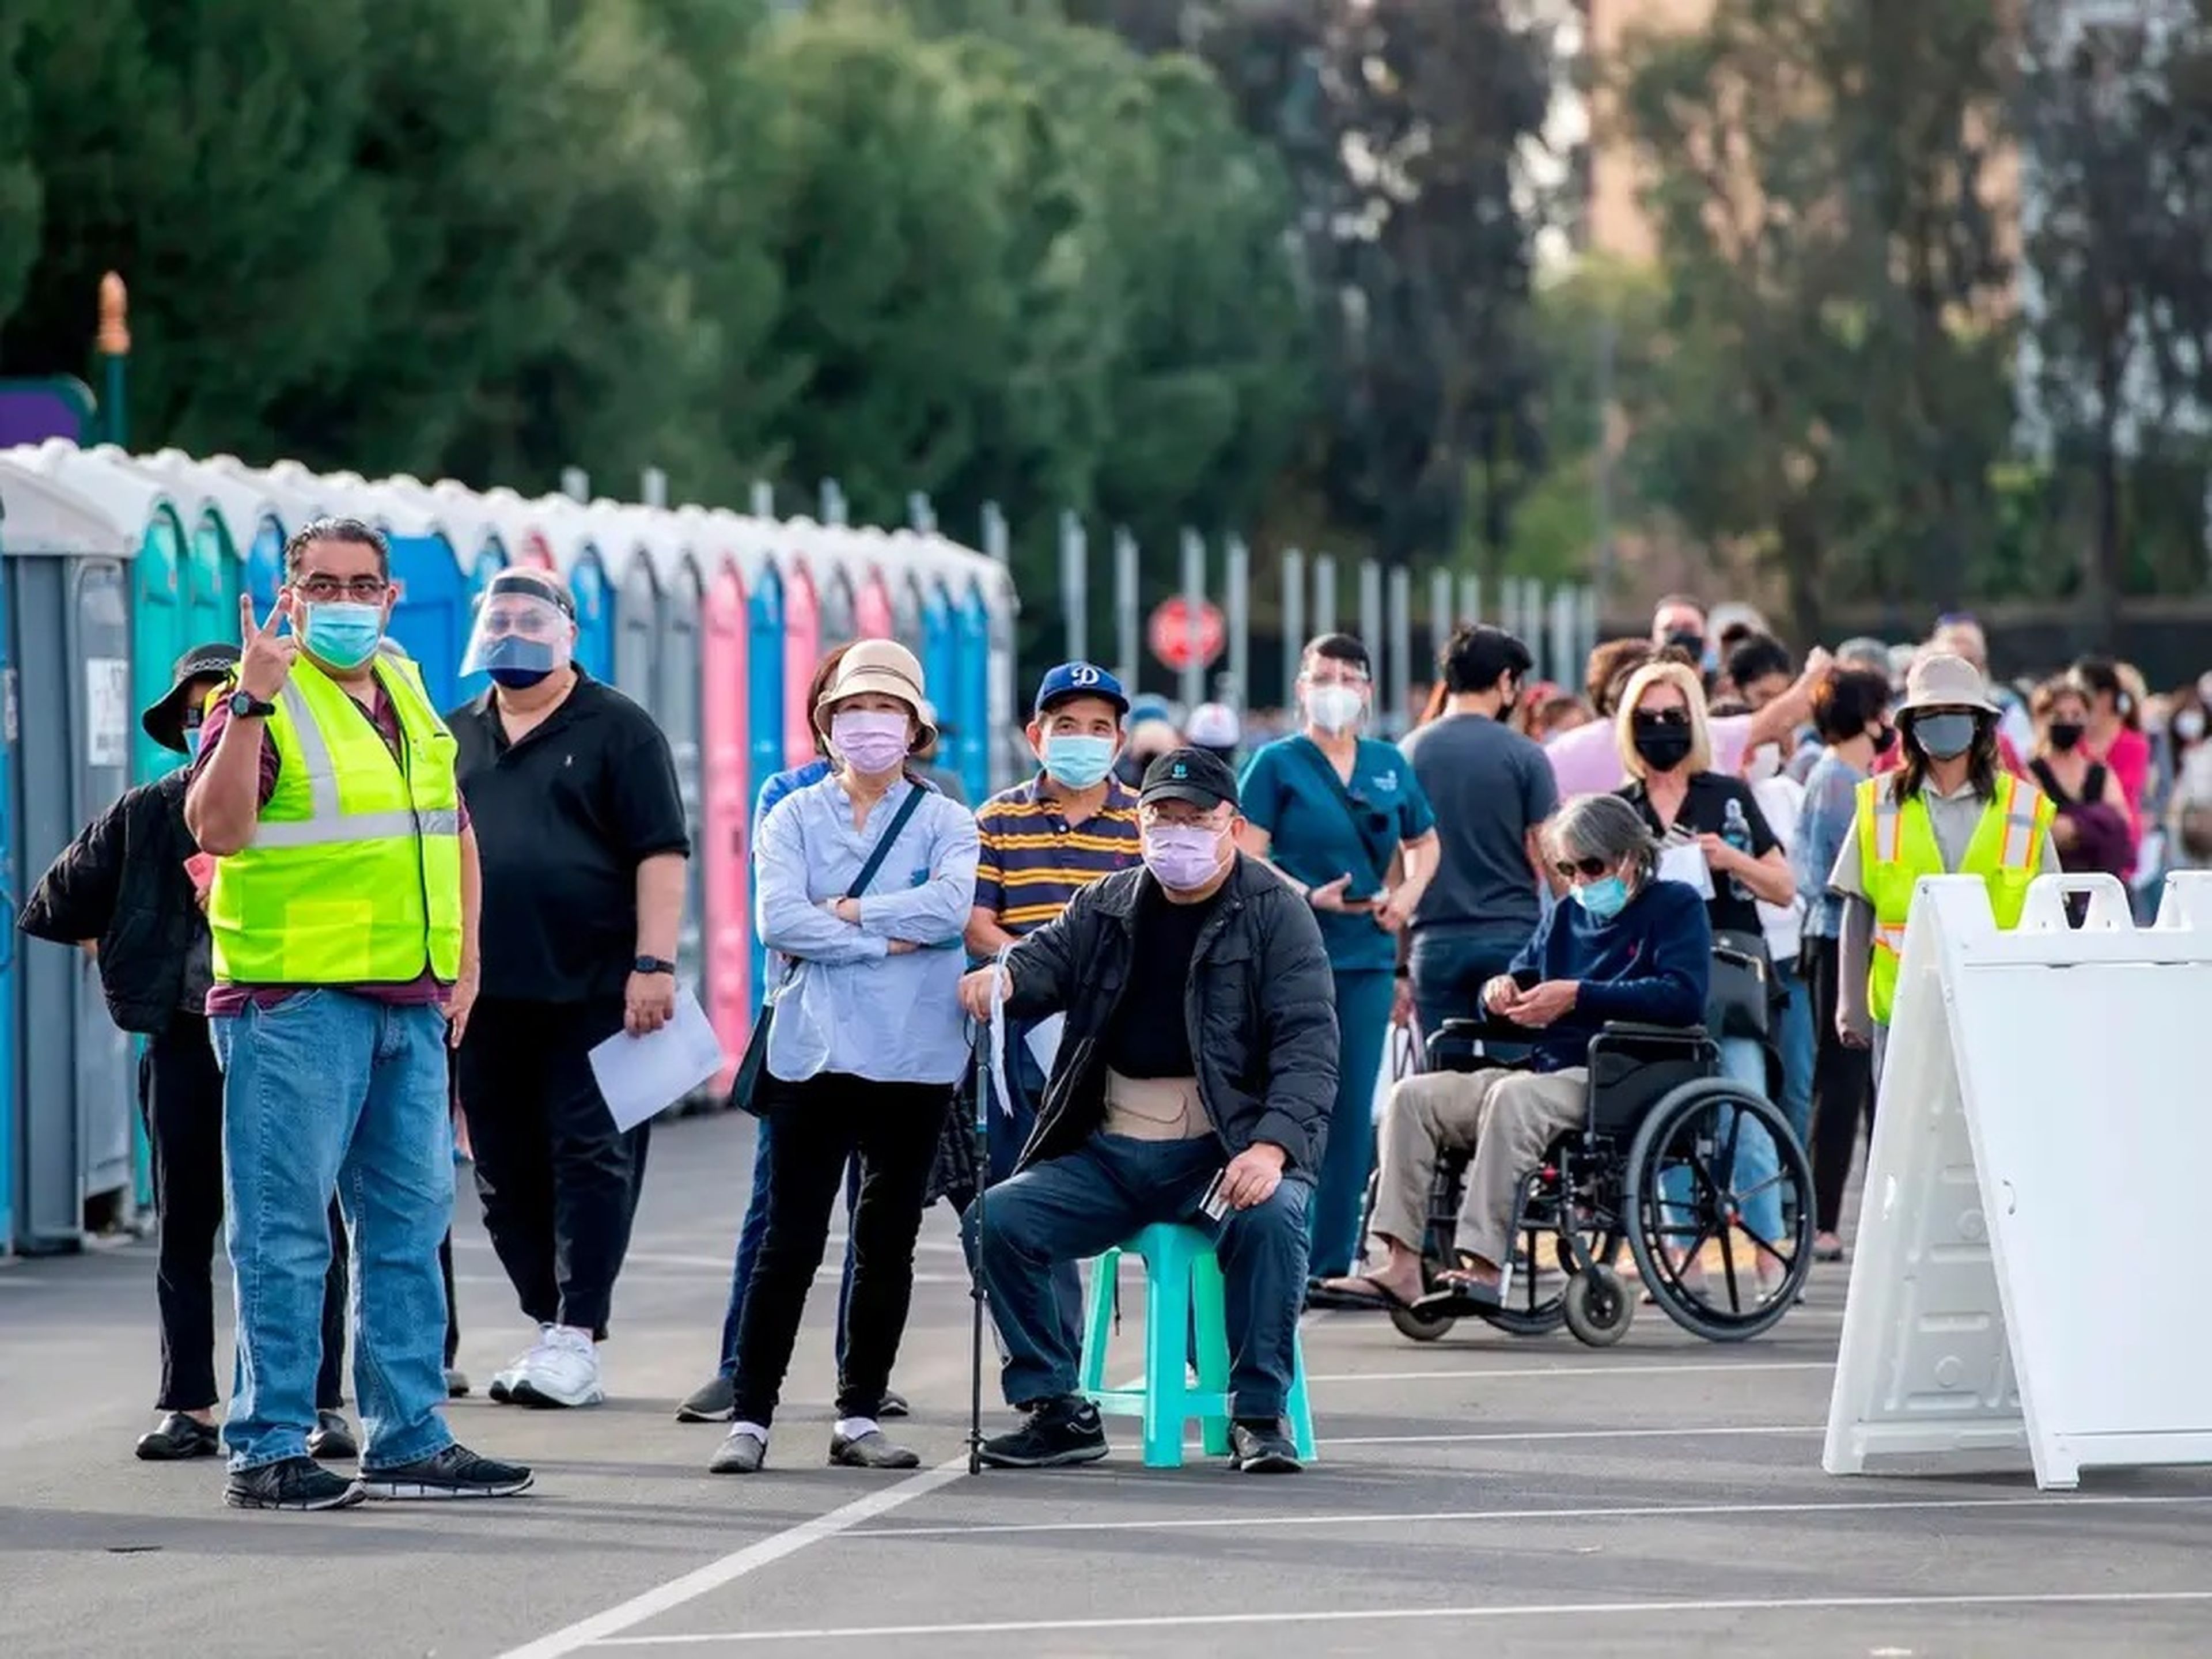 People wait in line in a Disneyland parking lot to receive Covid-19 vaccines on the opening day of the Disneyland Covid-19 vaccination site in Anaheim, California.